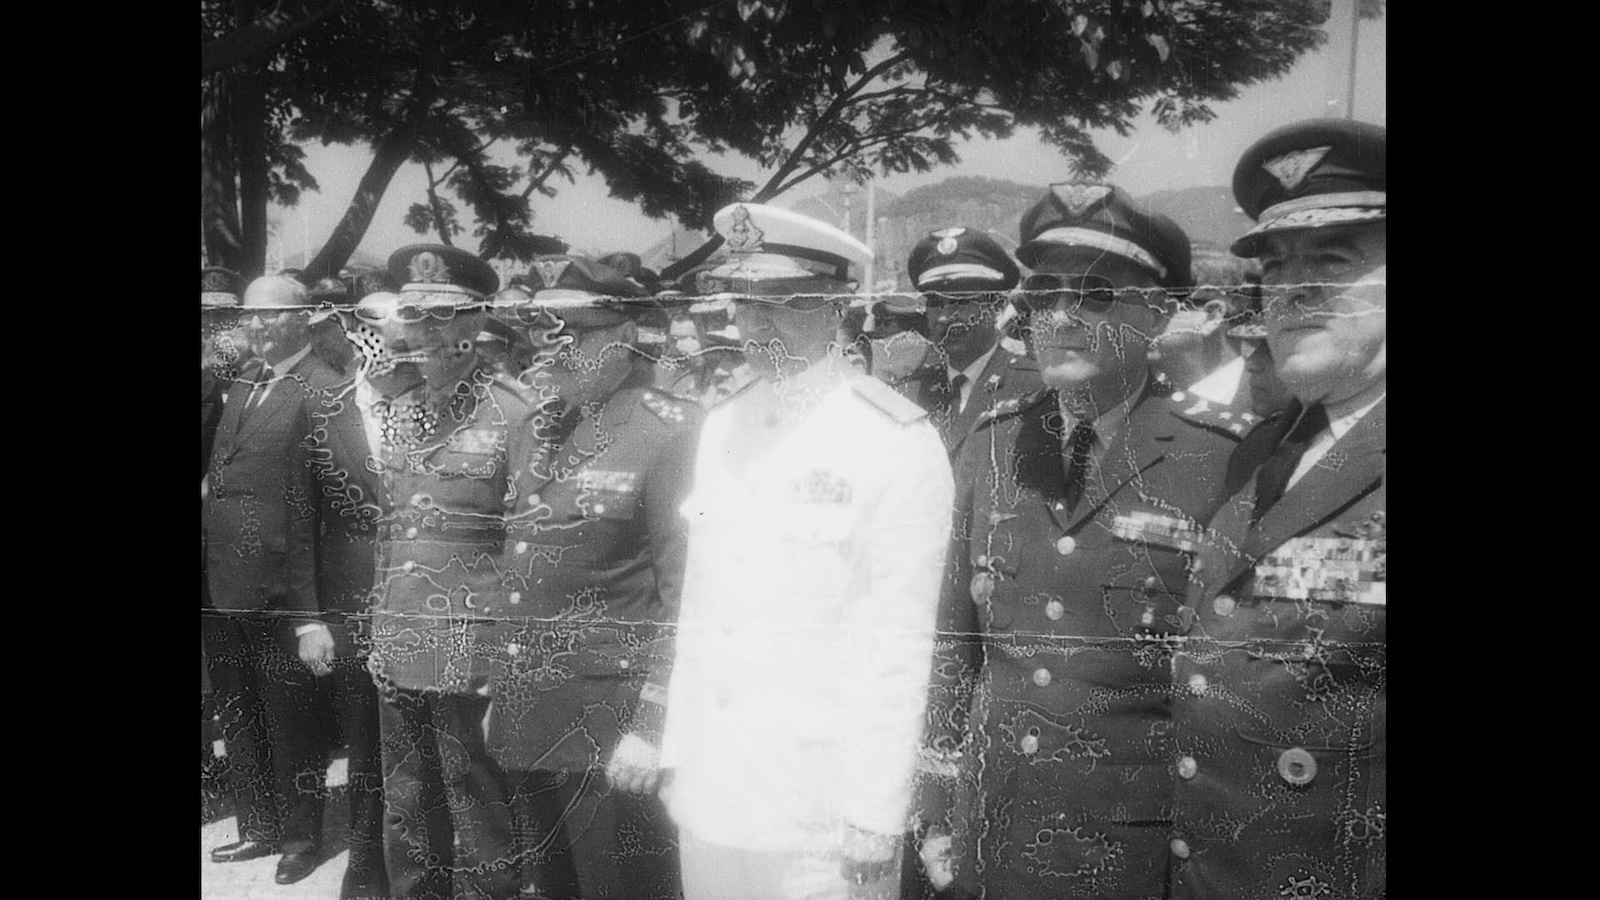 A black and white archival photo of military generals in uniform, one wearing white, the others darker uniforms, all wearing hats; the image is spotted with water damage and wear and tear.